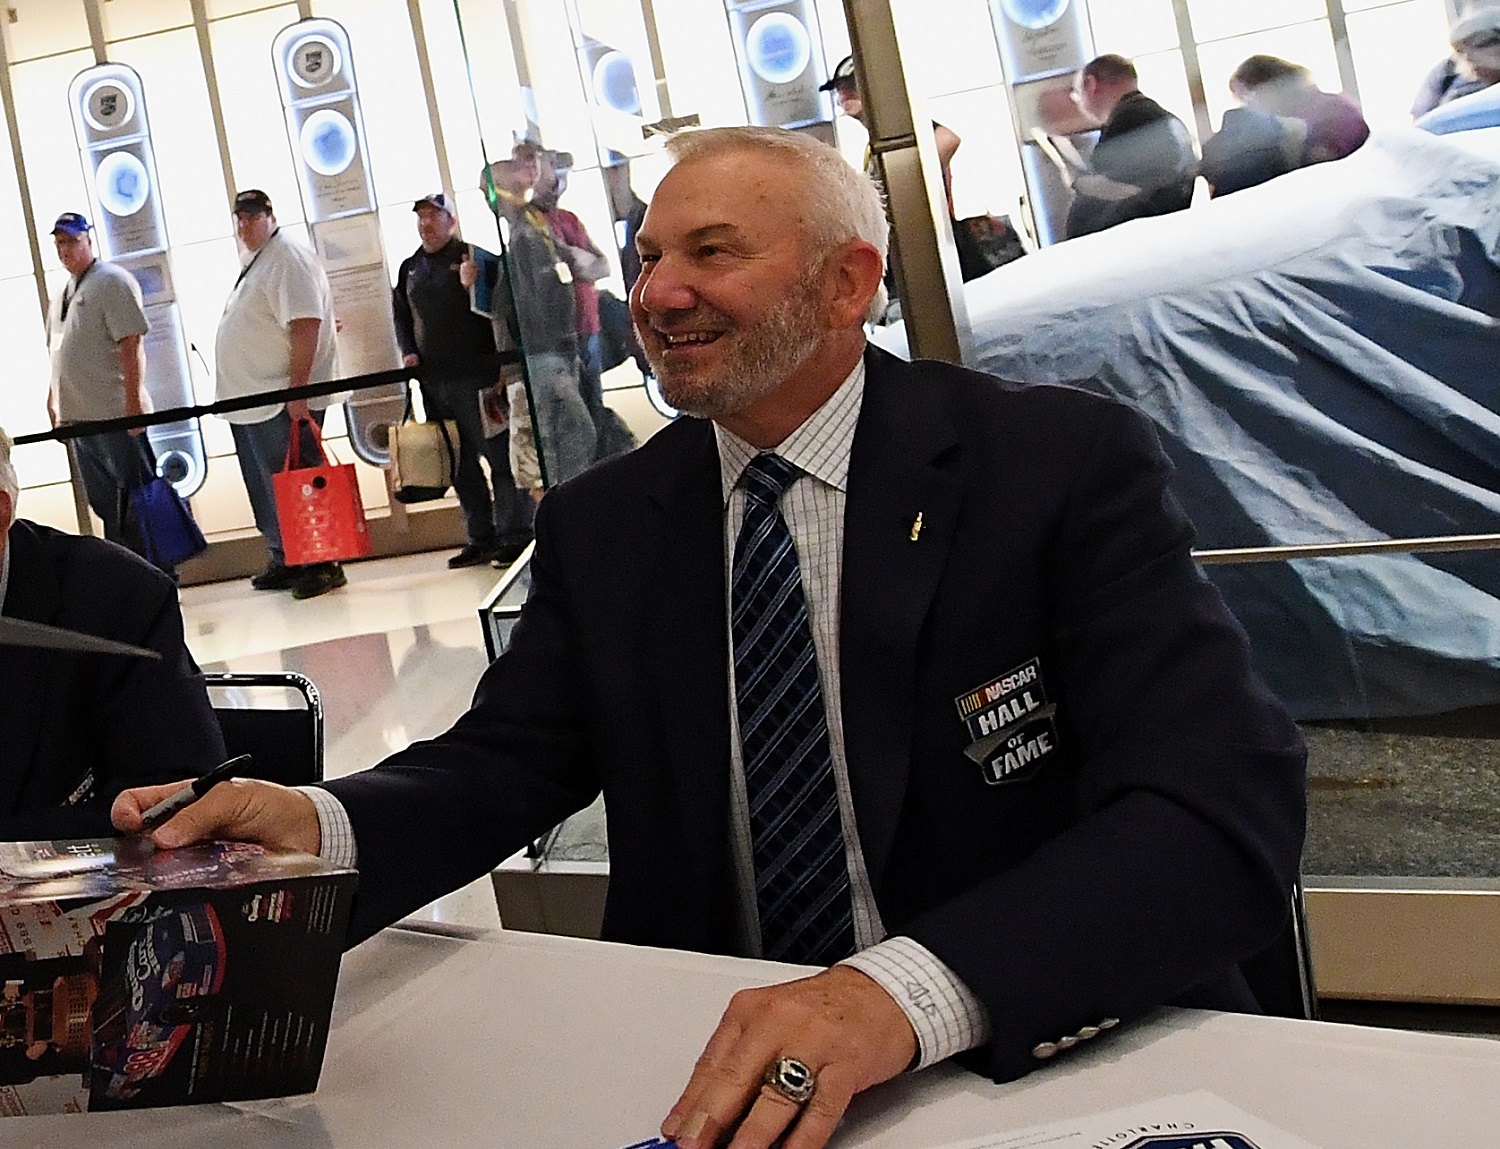 Dale Jarrett signs autographs at NASCAR Hall of Fame. Jarrett's father, Ned, is a fellow inductee in the Hall in Charlotte, North Carolina. | Mike Comer/Getty Images